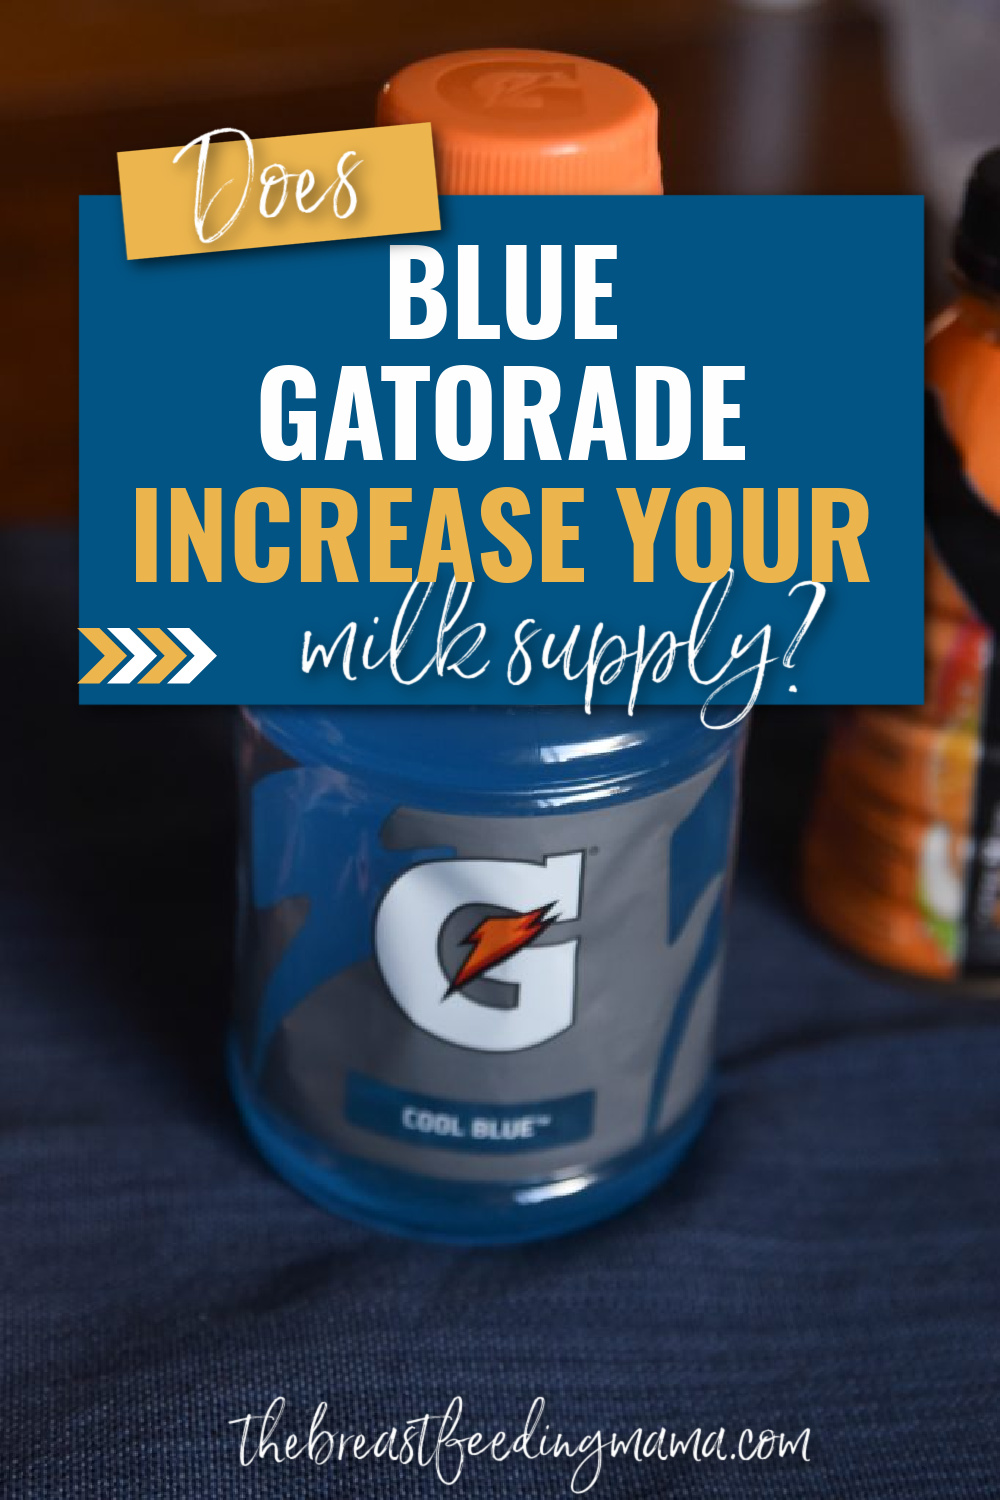 The recommendation to drink Blue Gatorade for increasing milk supply is a popular one that floods mommy groups everywhere. But does it actually work? Here are my thoughts!